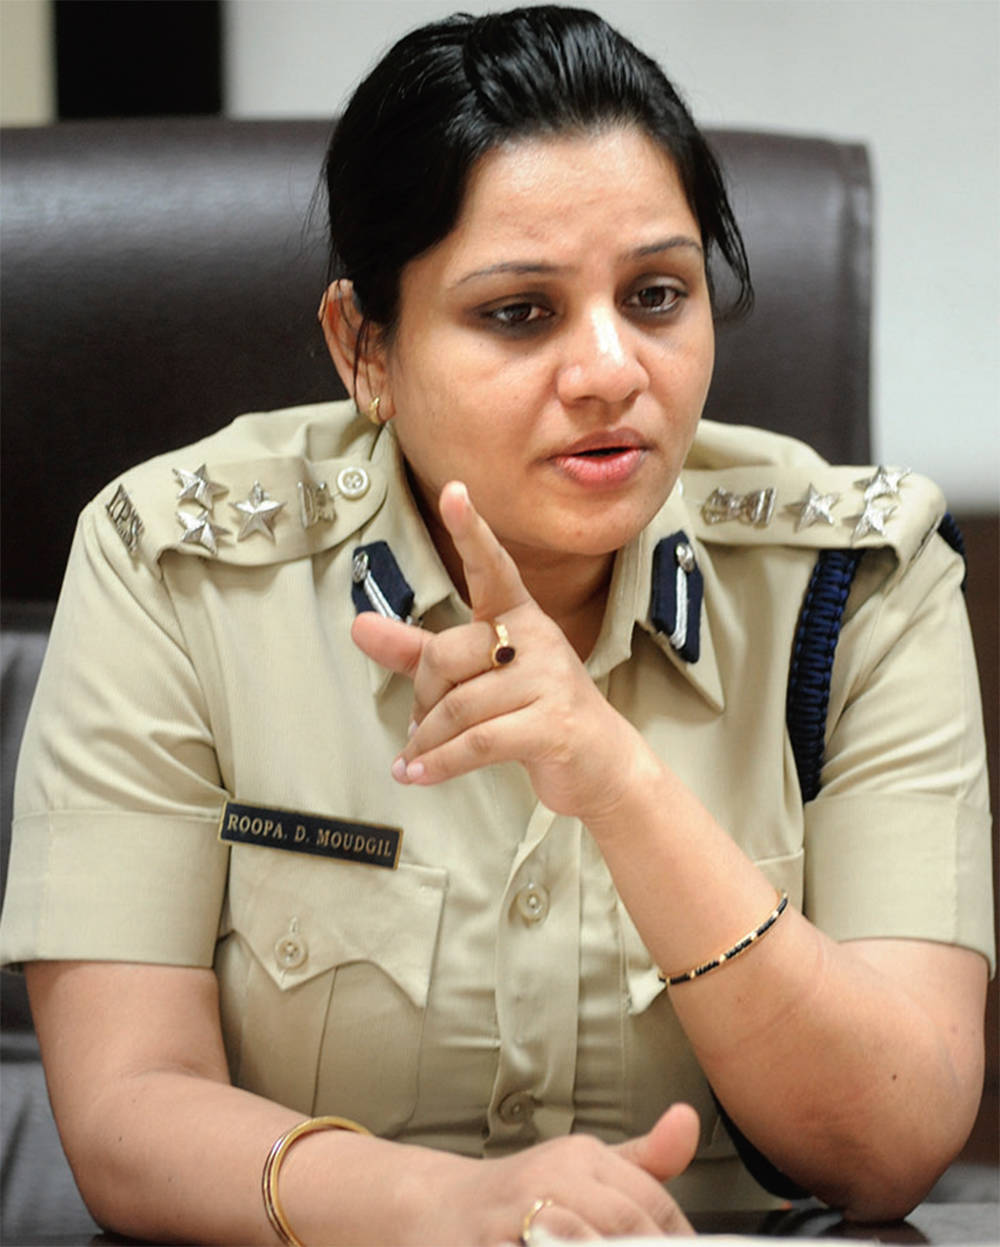 Female Police Officer Poses with Confidence